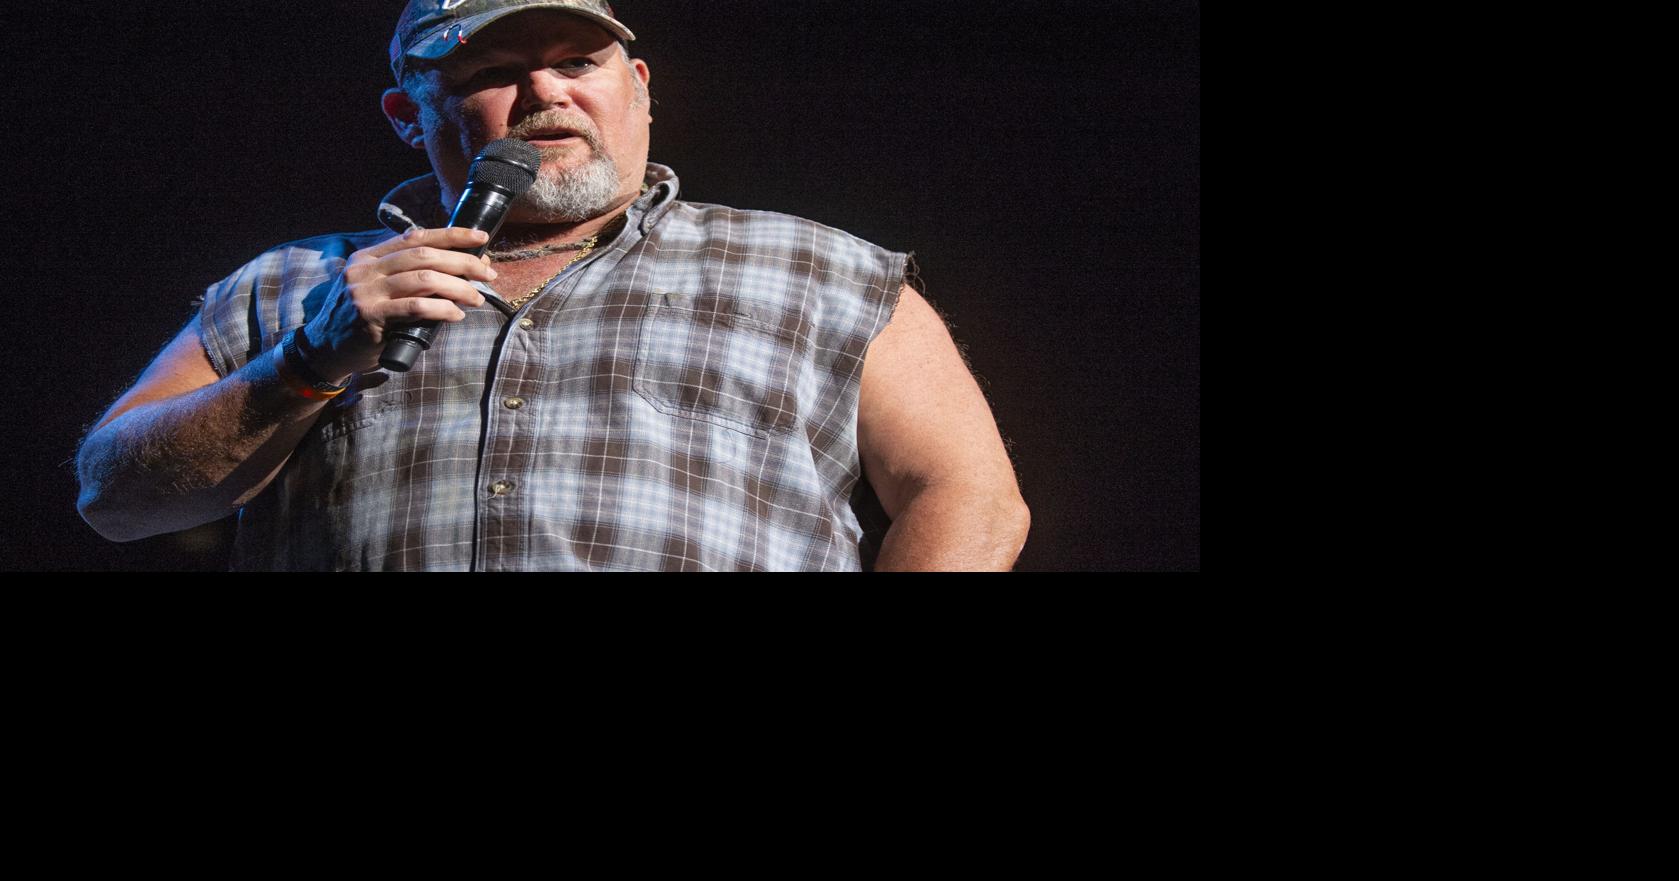 Larry the Cable Guy has cut his stand-up dates by 90% since 2015